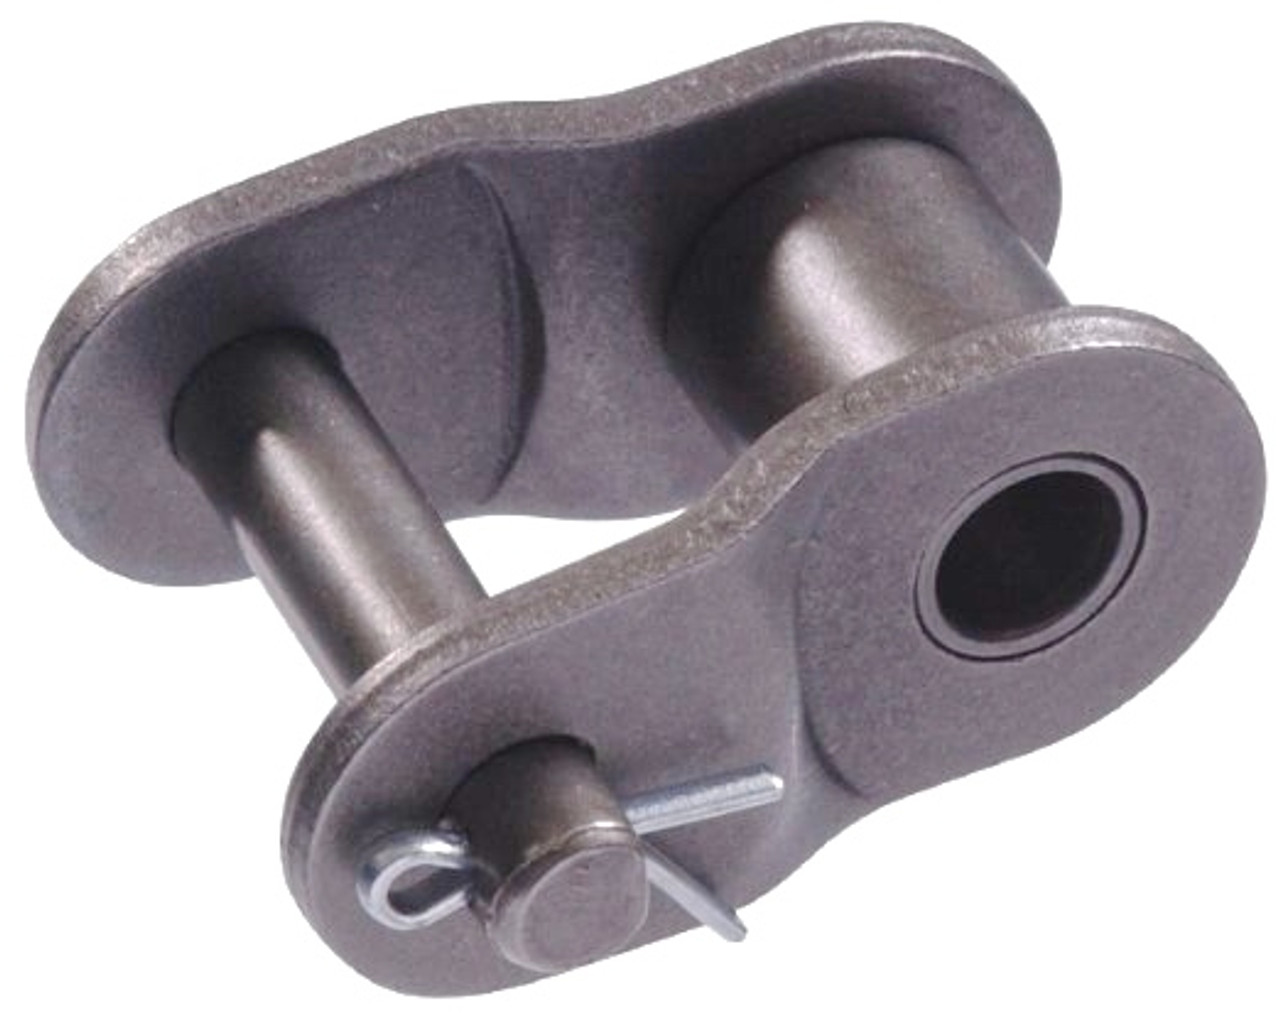 CHP® Extended Life Roller Chain Offset Link  DRV-100-1 DOFF LINK CH